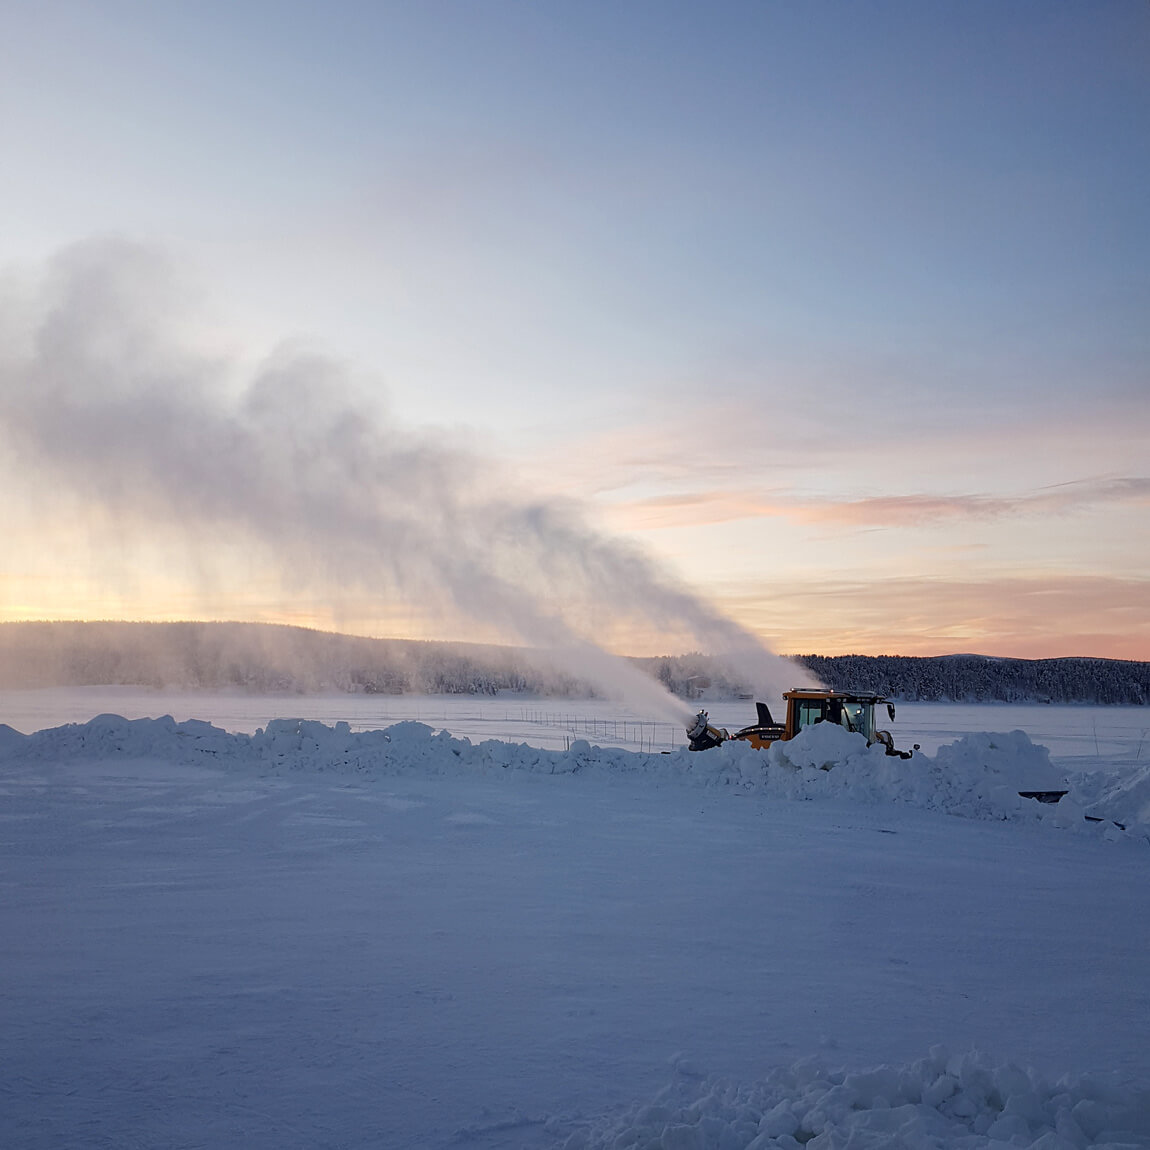 Snow canons at sunset at ICEHOTEL Sweden, helping make the right kind of snow for the construction of ICEHOTEL